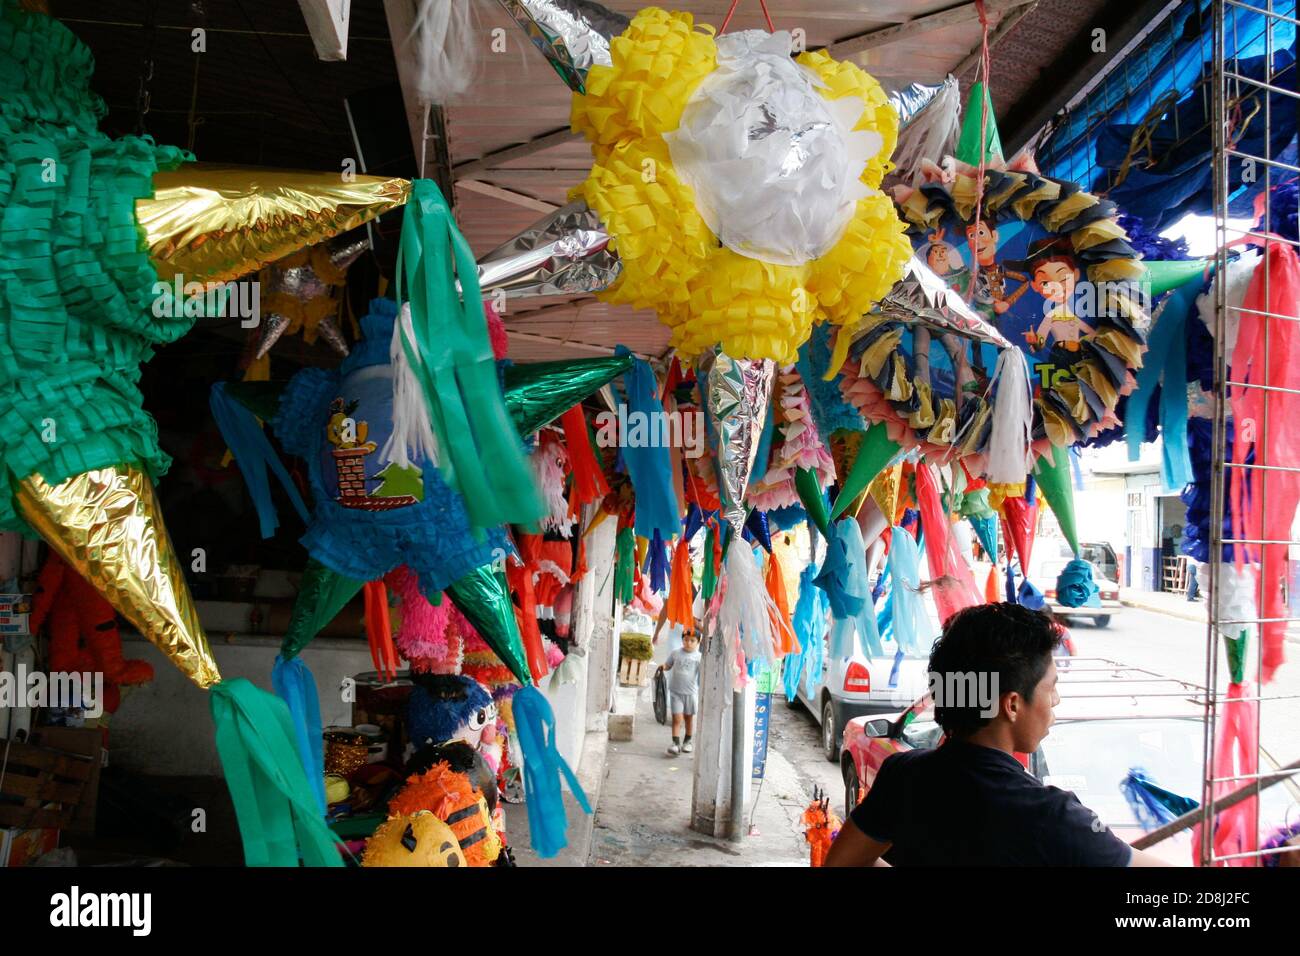 Villahermosa, Tabasco / Mexico - 12-15-2008  :sale of materials for parties and traditional celebrations Stock Photo